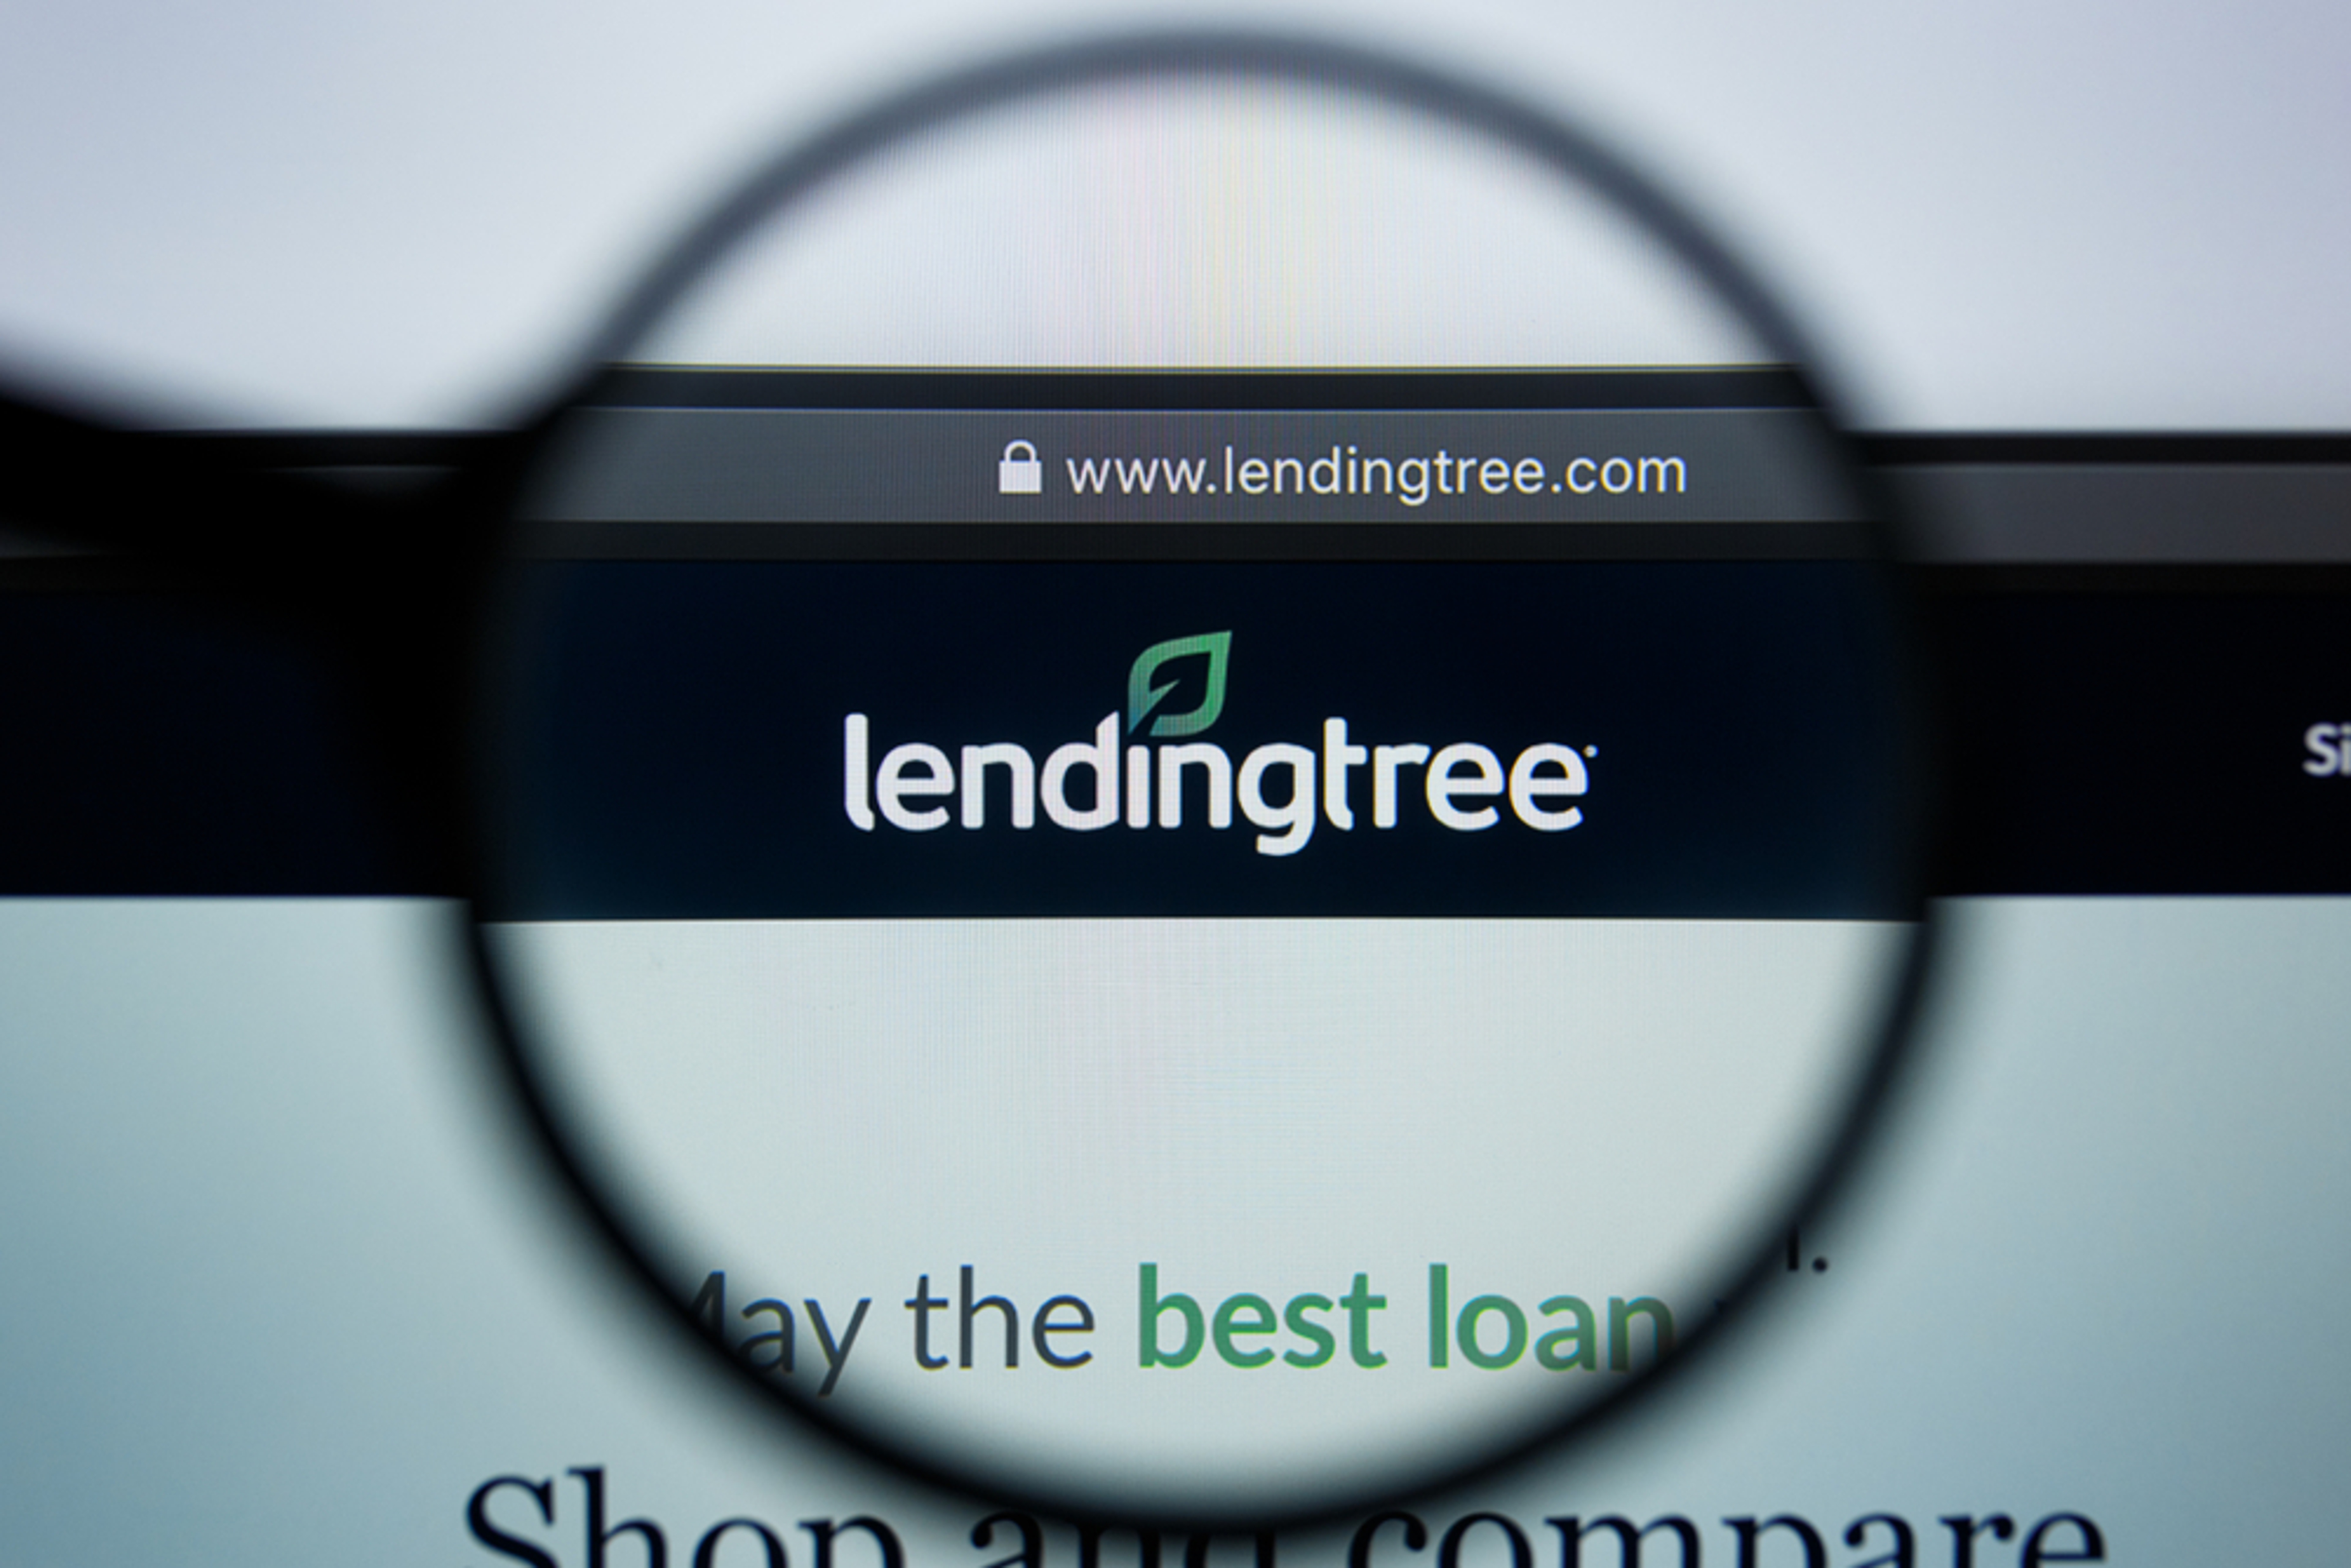 Why This LendingTree Analyst Cut Price Target By 57%